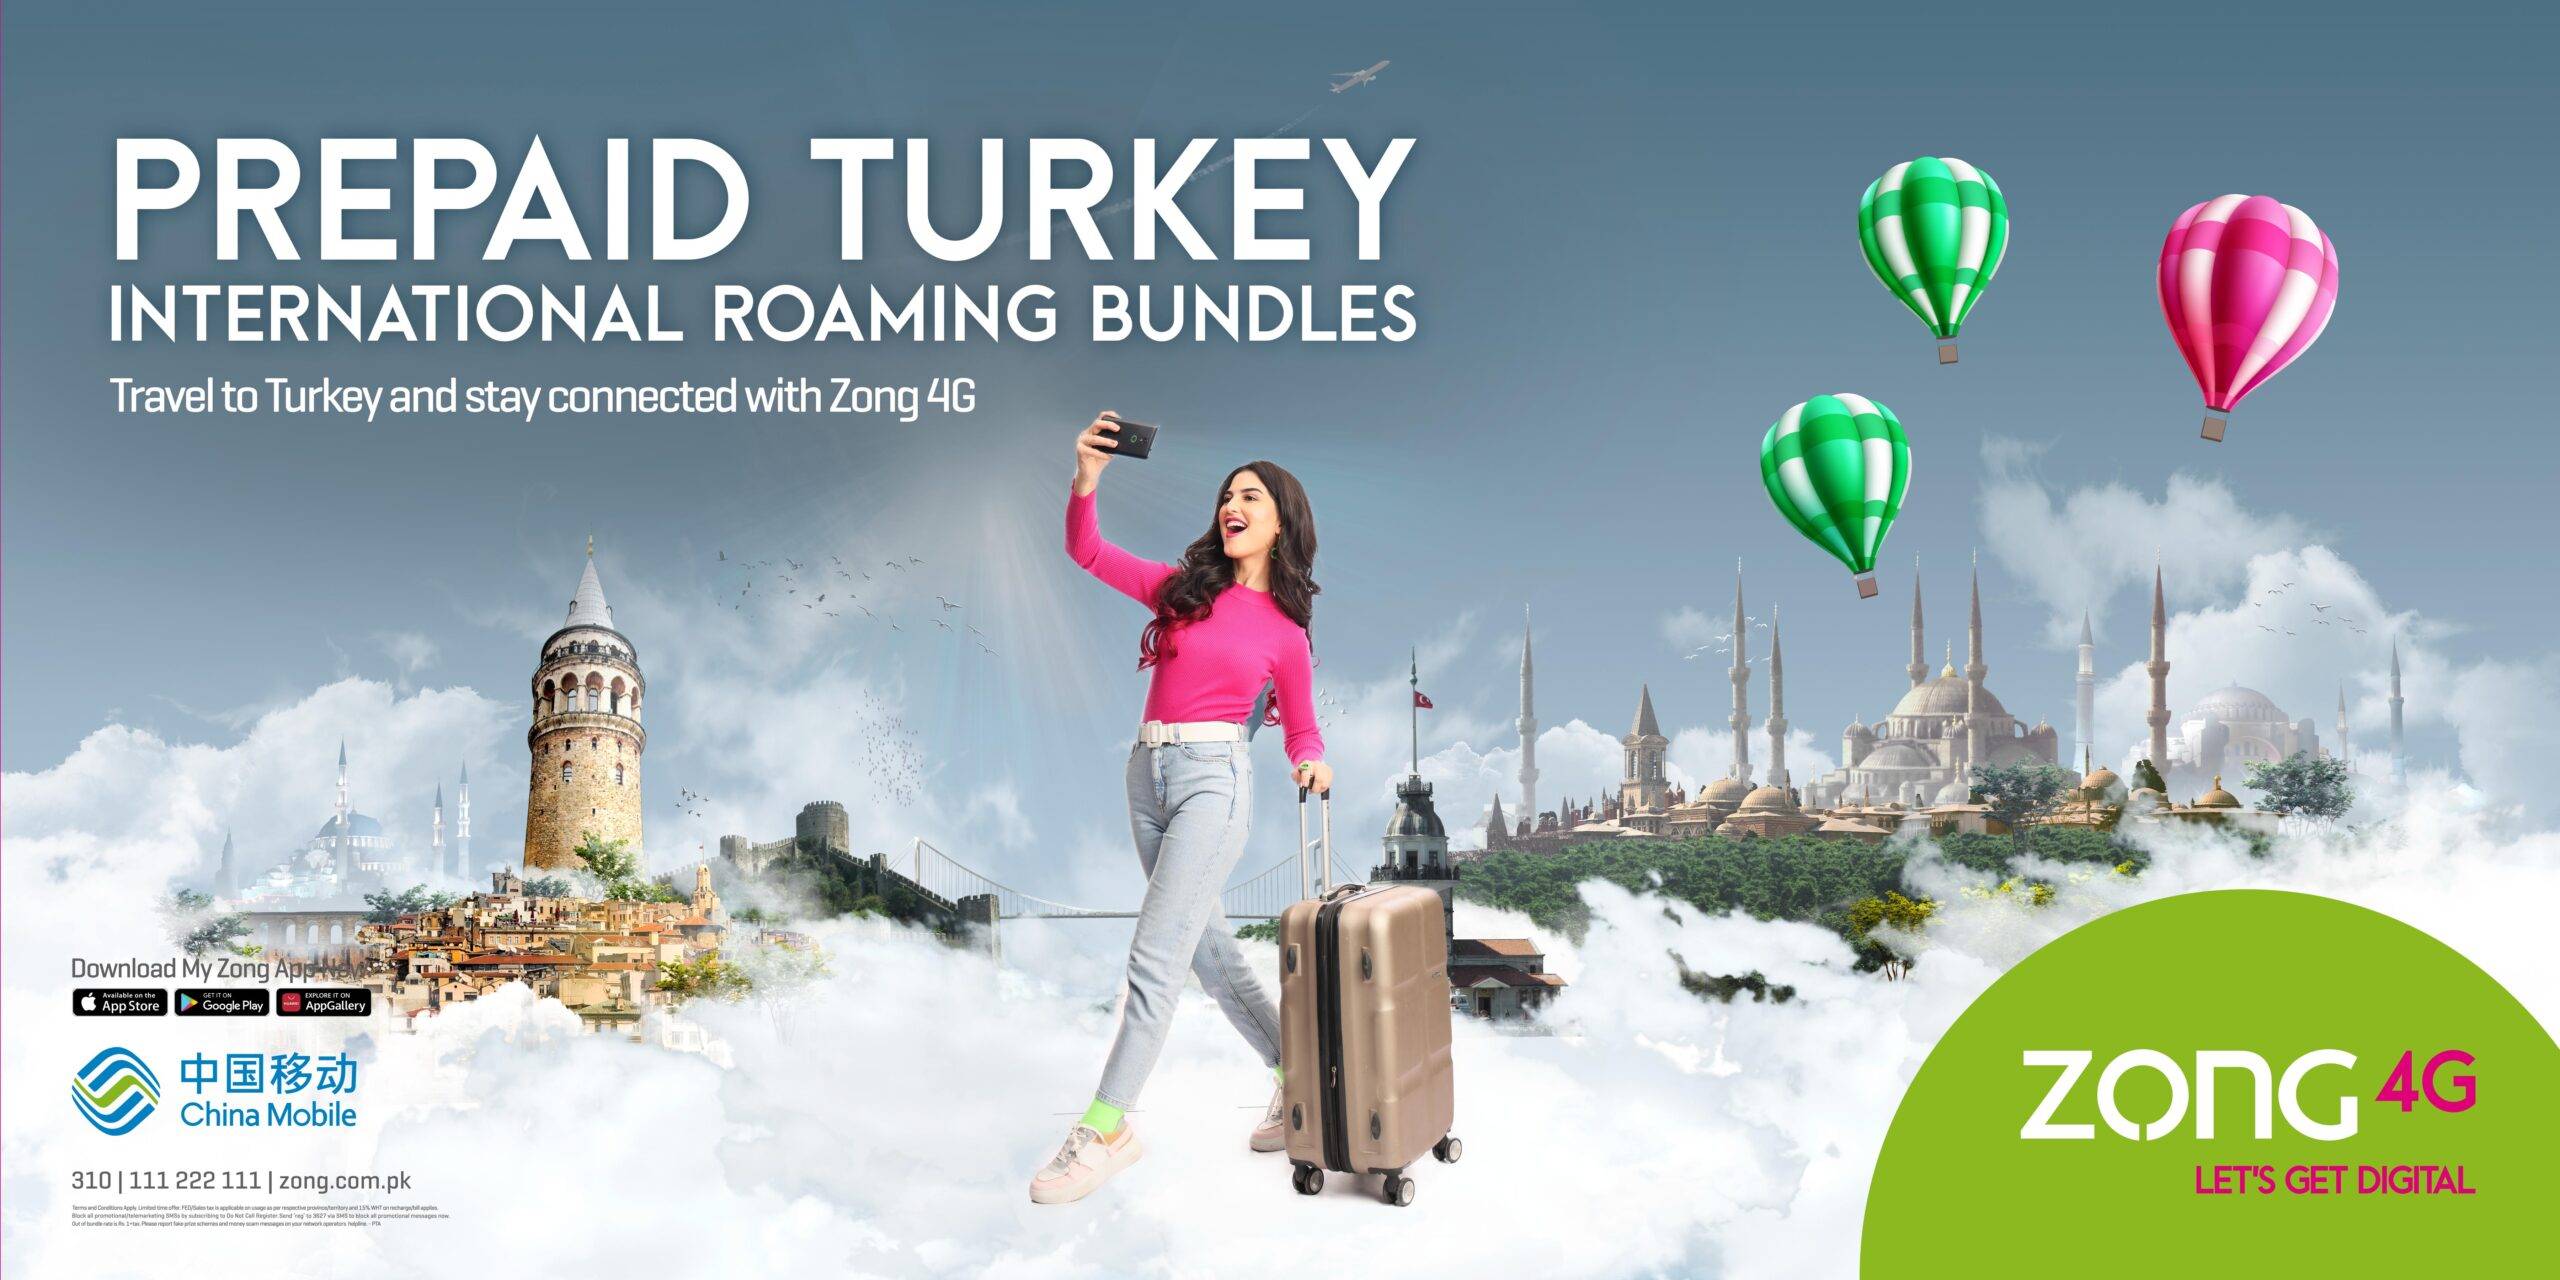 Get Ready to Travel to Turkey with Zong 4G innovative new Roaming Offers